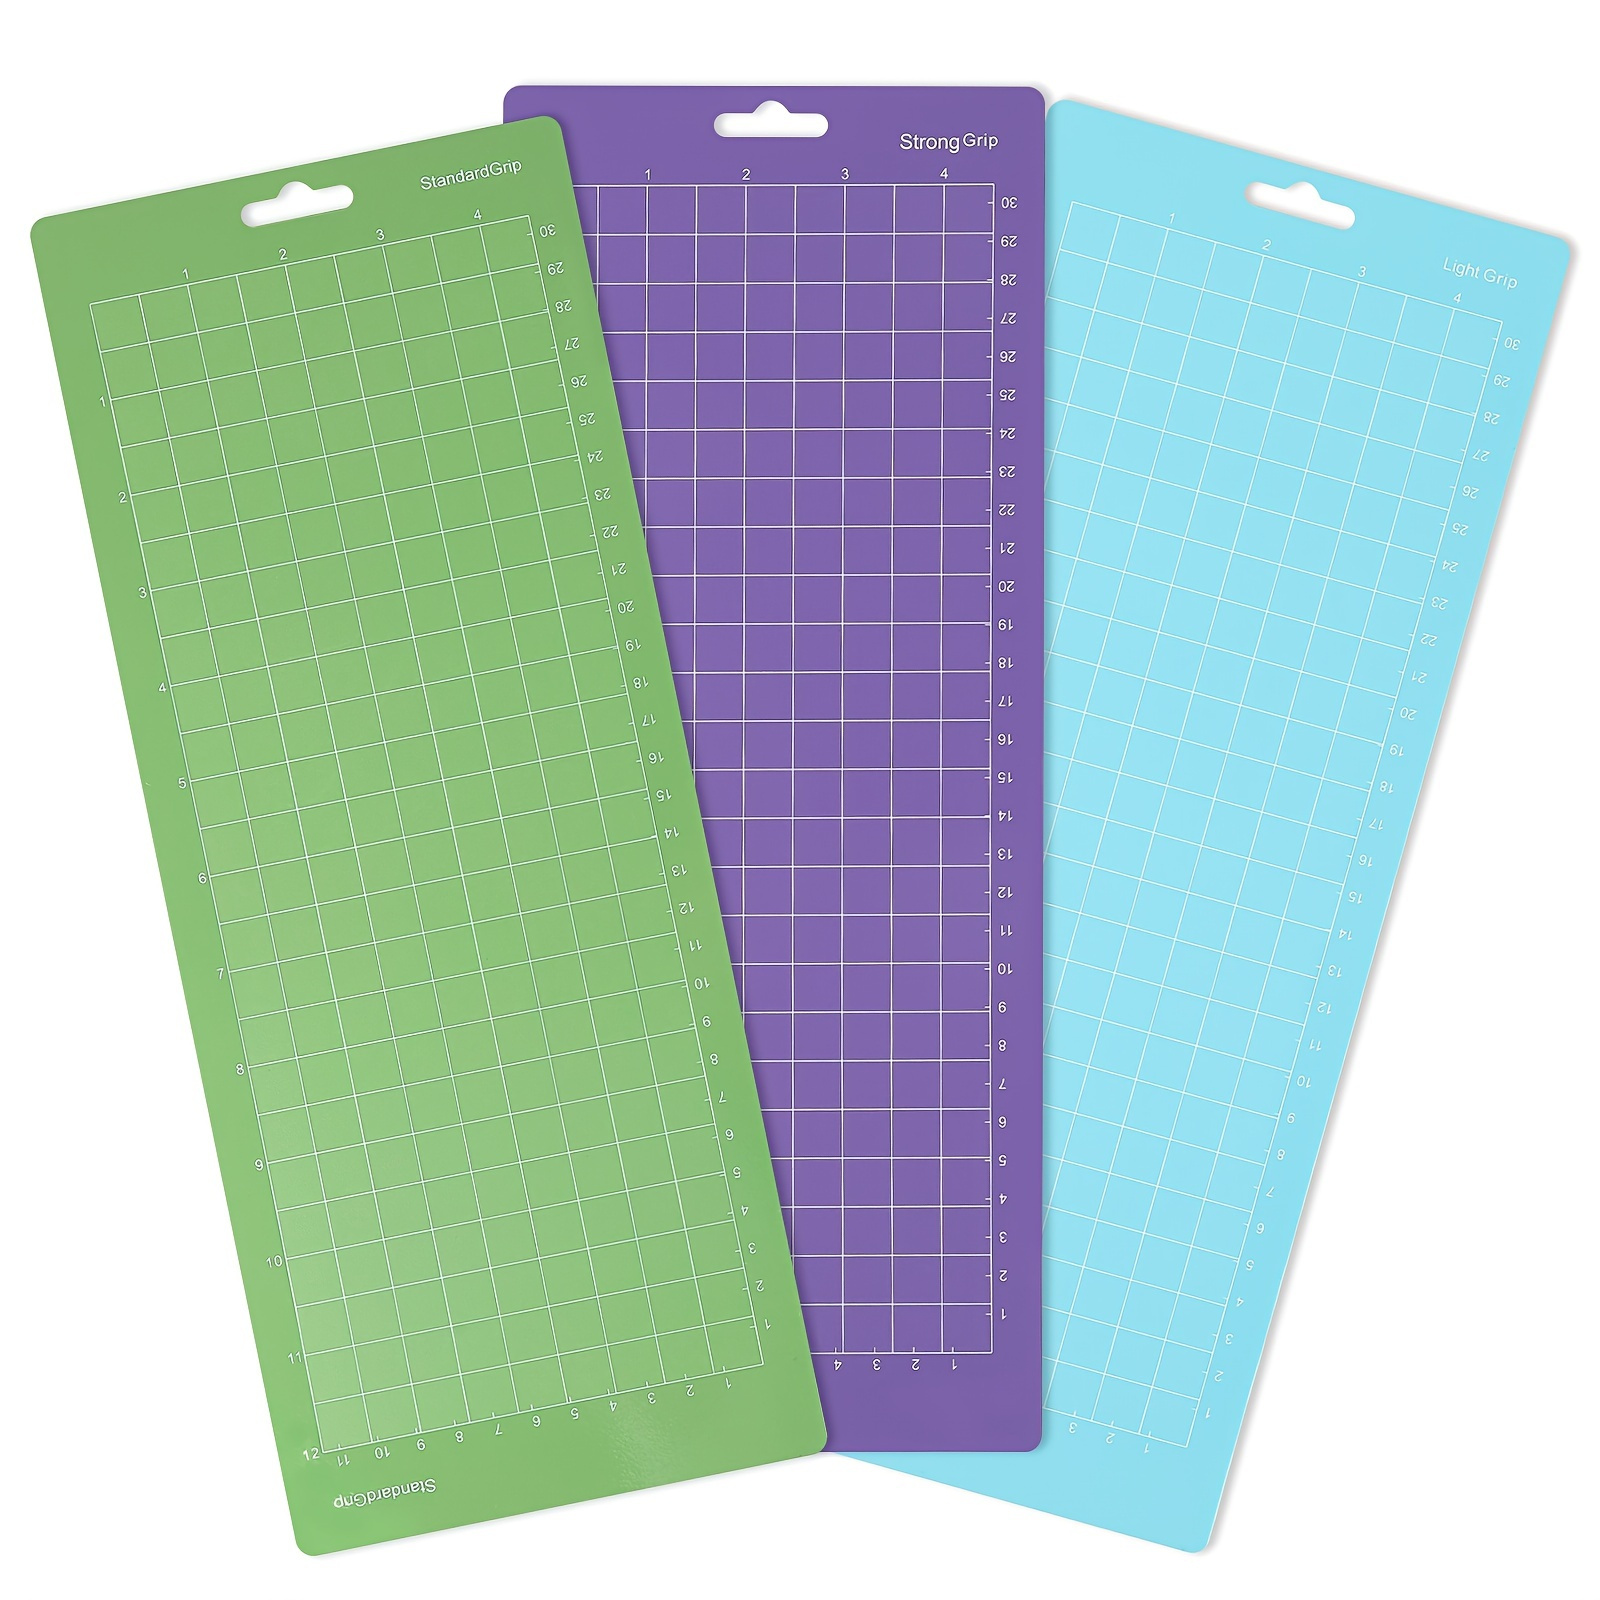 

1pc/3pcs Cutting Mat For Cricut, 12*4.5 Inch Cutting Pad For Cricut (standard Grip, Light Grip, Strong Grip And Fabric Grip) Explore Air 2/air/one, Various Adhesive Cutting Pads, Accessories